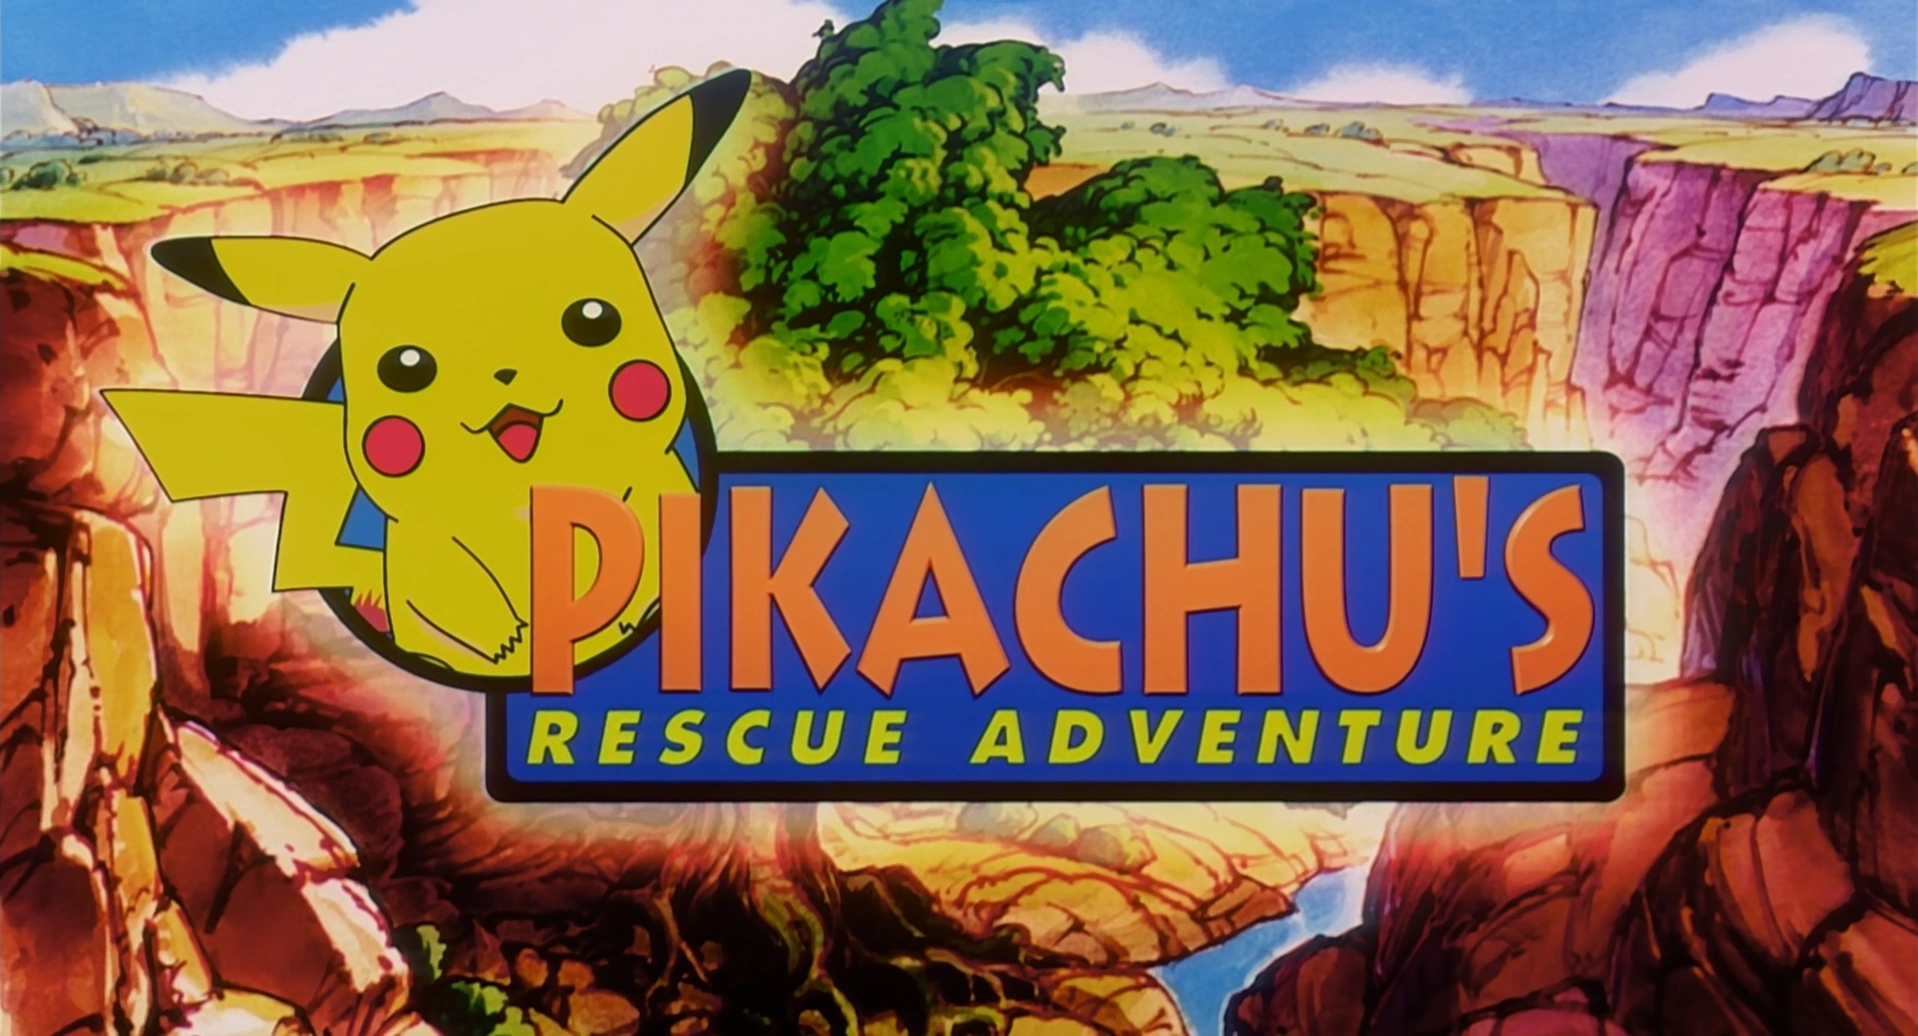 Pk004: Pikachu's Rescue Adventure 1999 - Interesting Facts About Japanese Short Anime Movie